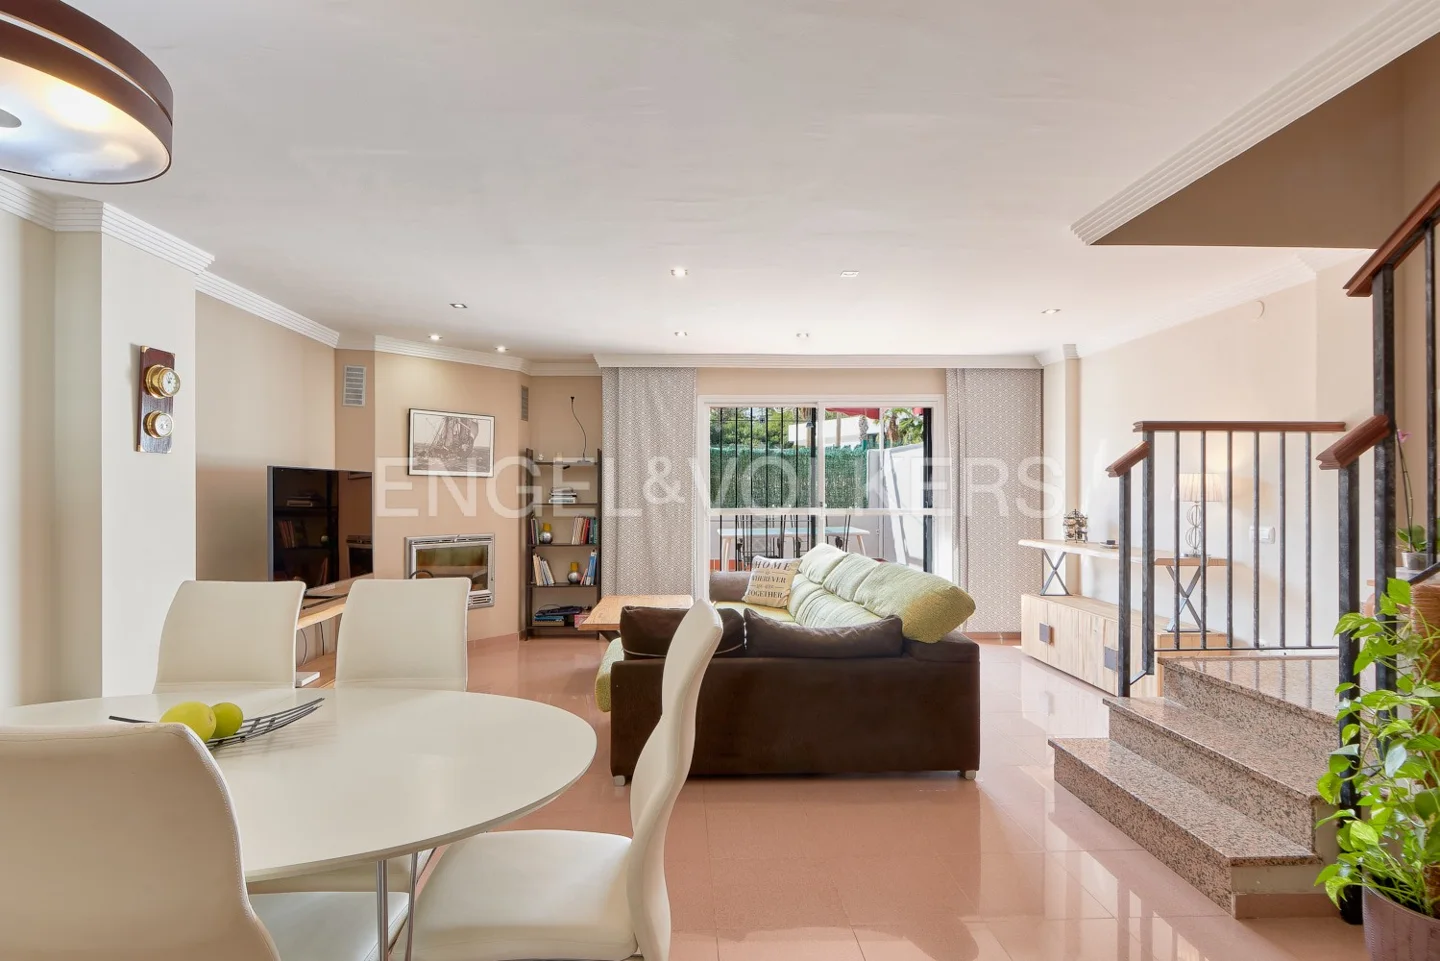 4-bedroom townhouse close to the beach